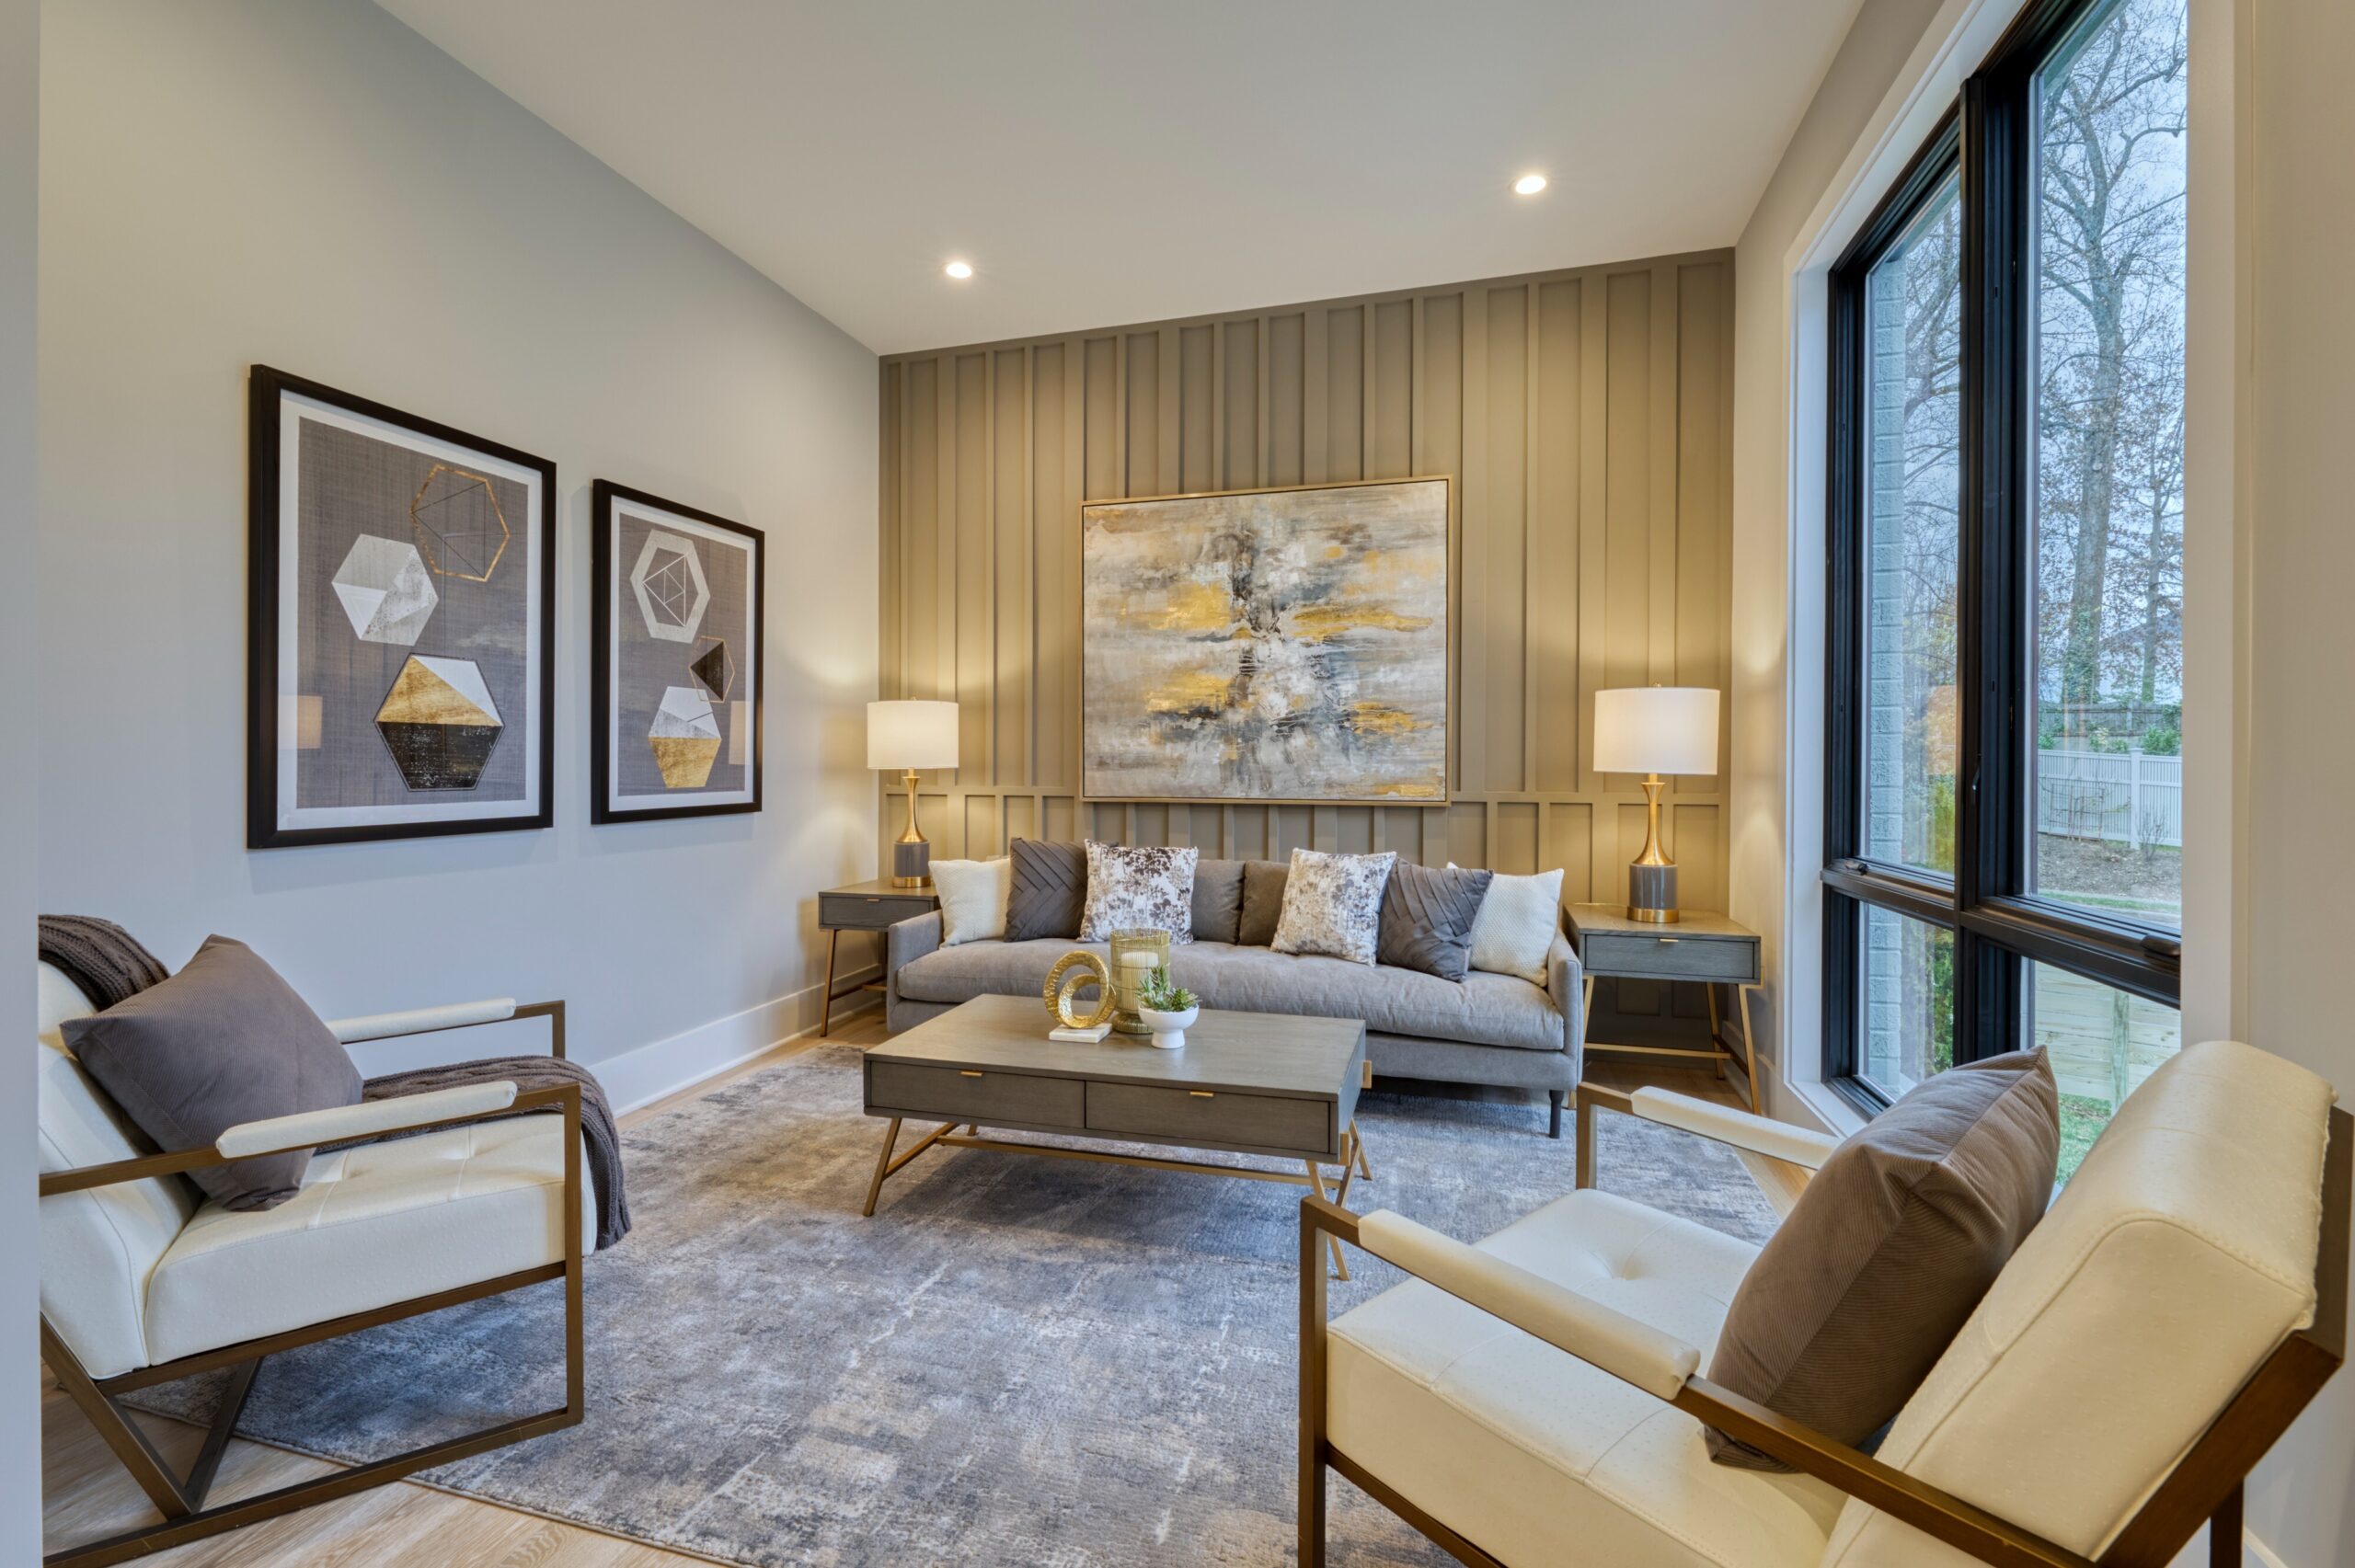 Professional interior photo of new construction home at 3400 N Ohio St - showing the front formal living room with accent wall and floor to ceiling windows